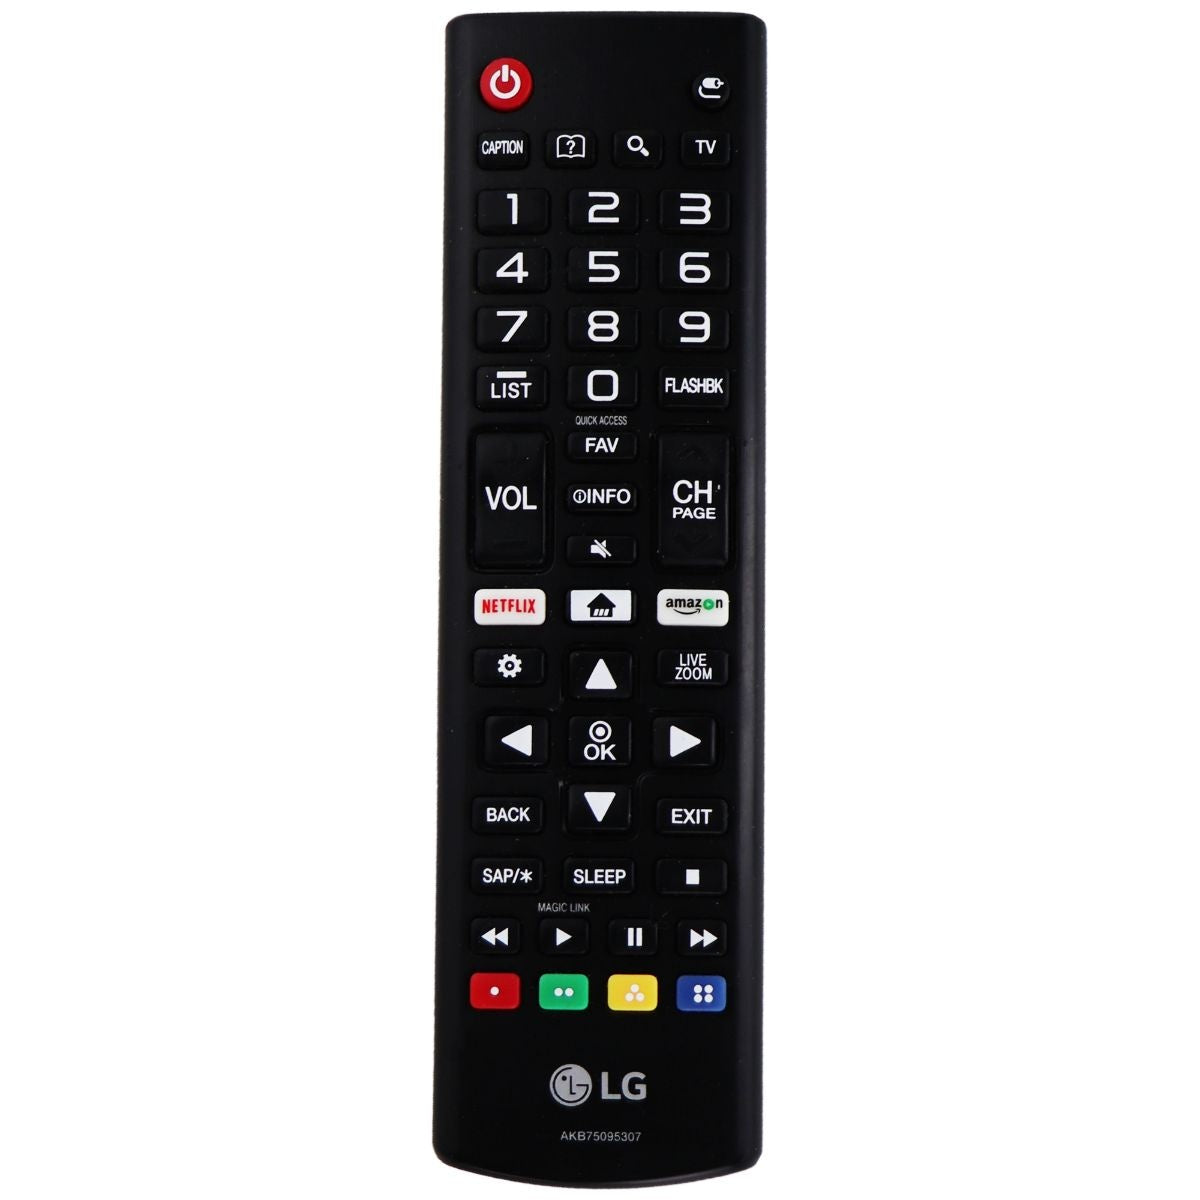 LG Remote Control (AKB75095307) for Select LG TVs - Black TV, Video & Audio Accessories - Remote Controls LG    - Simple Cell Bulk Wholesale Pricing - USA Seller